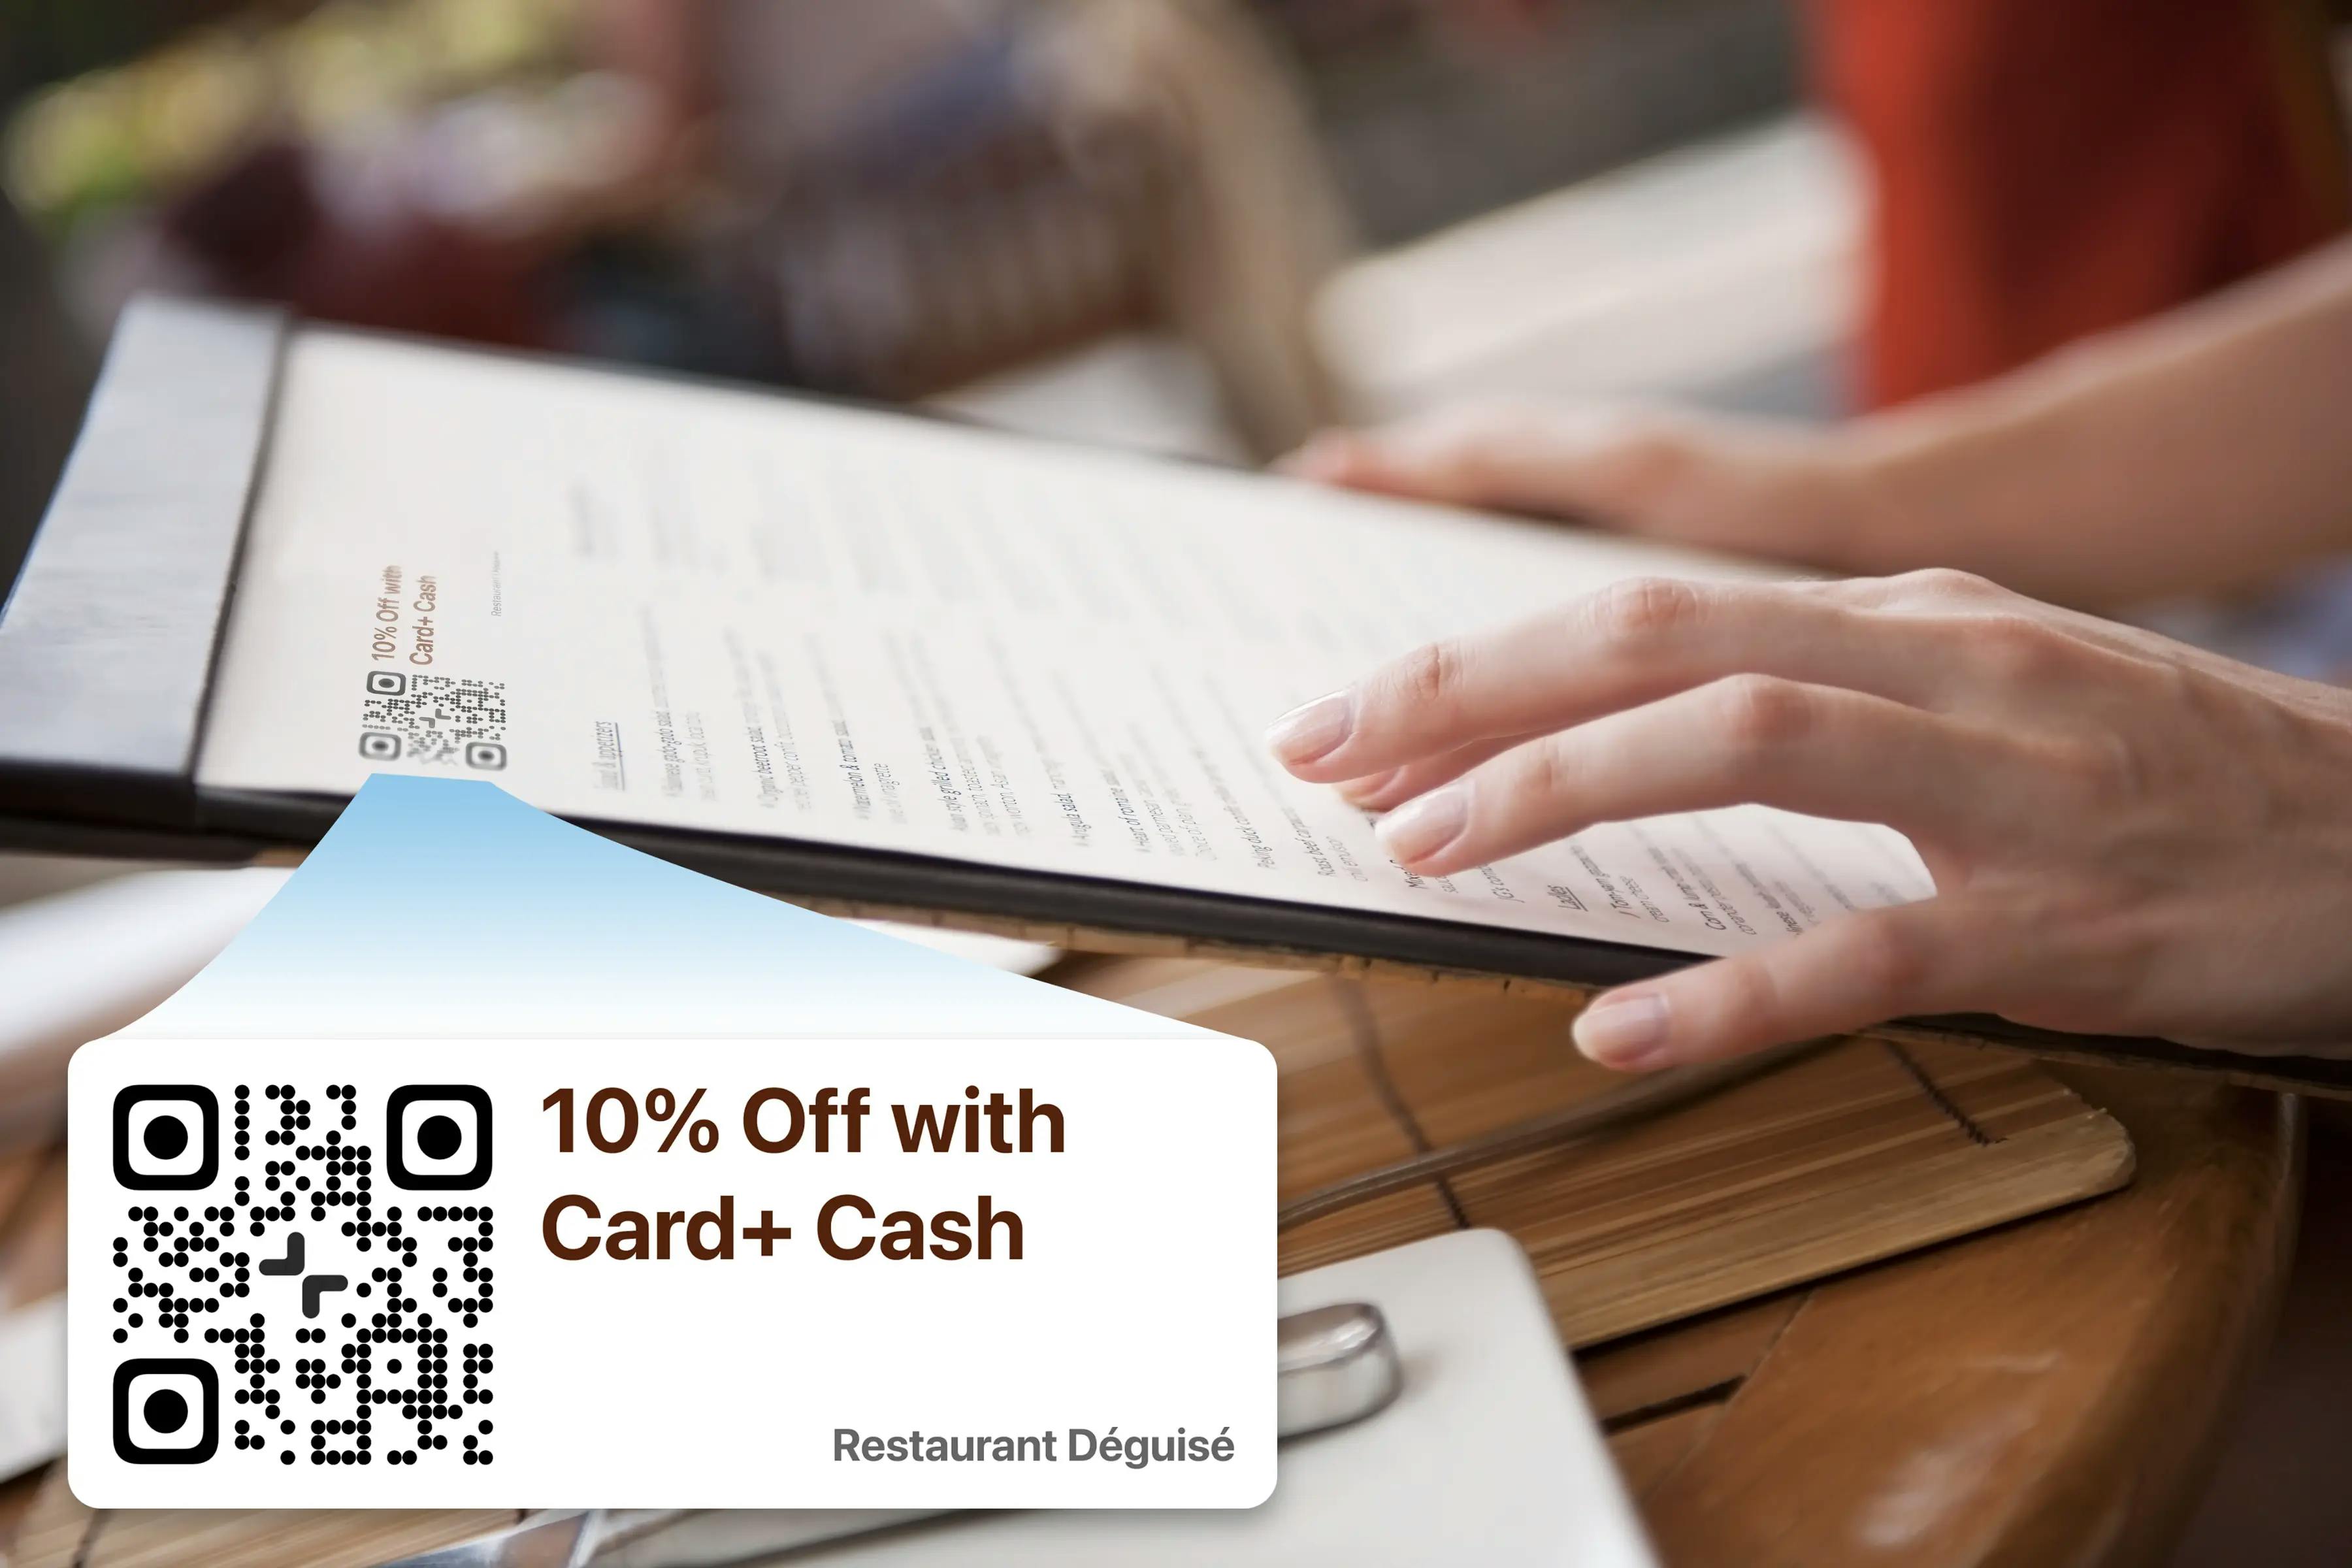 Offer at restaurant with QR code to checkout with Card+